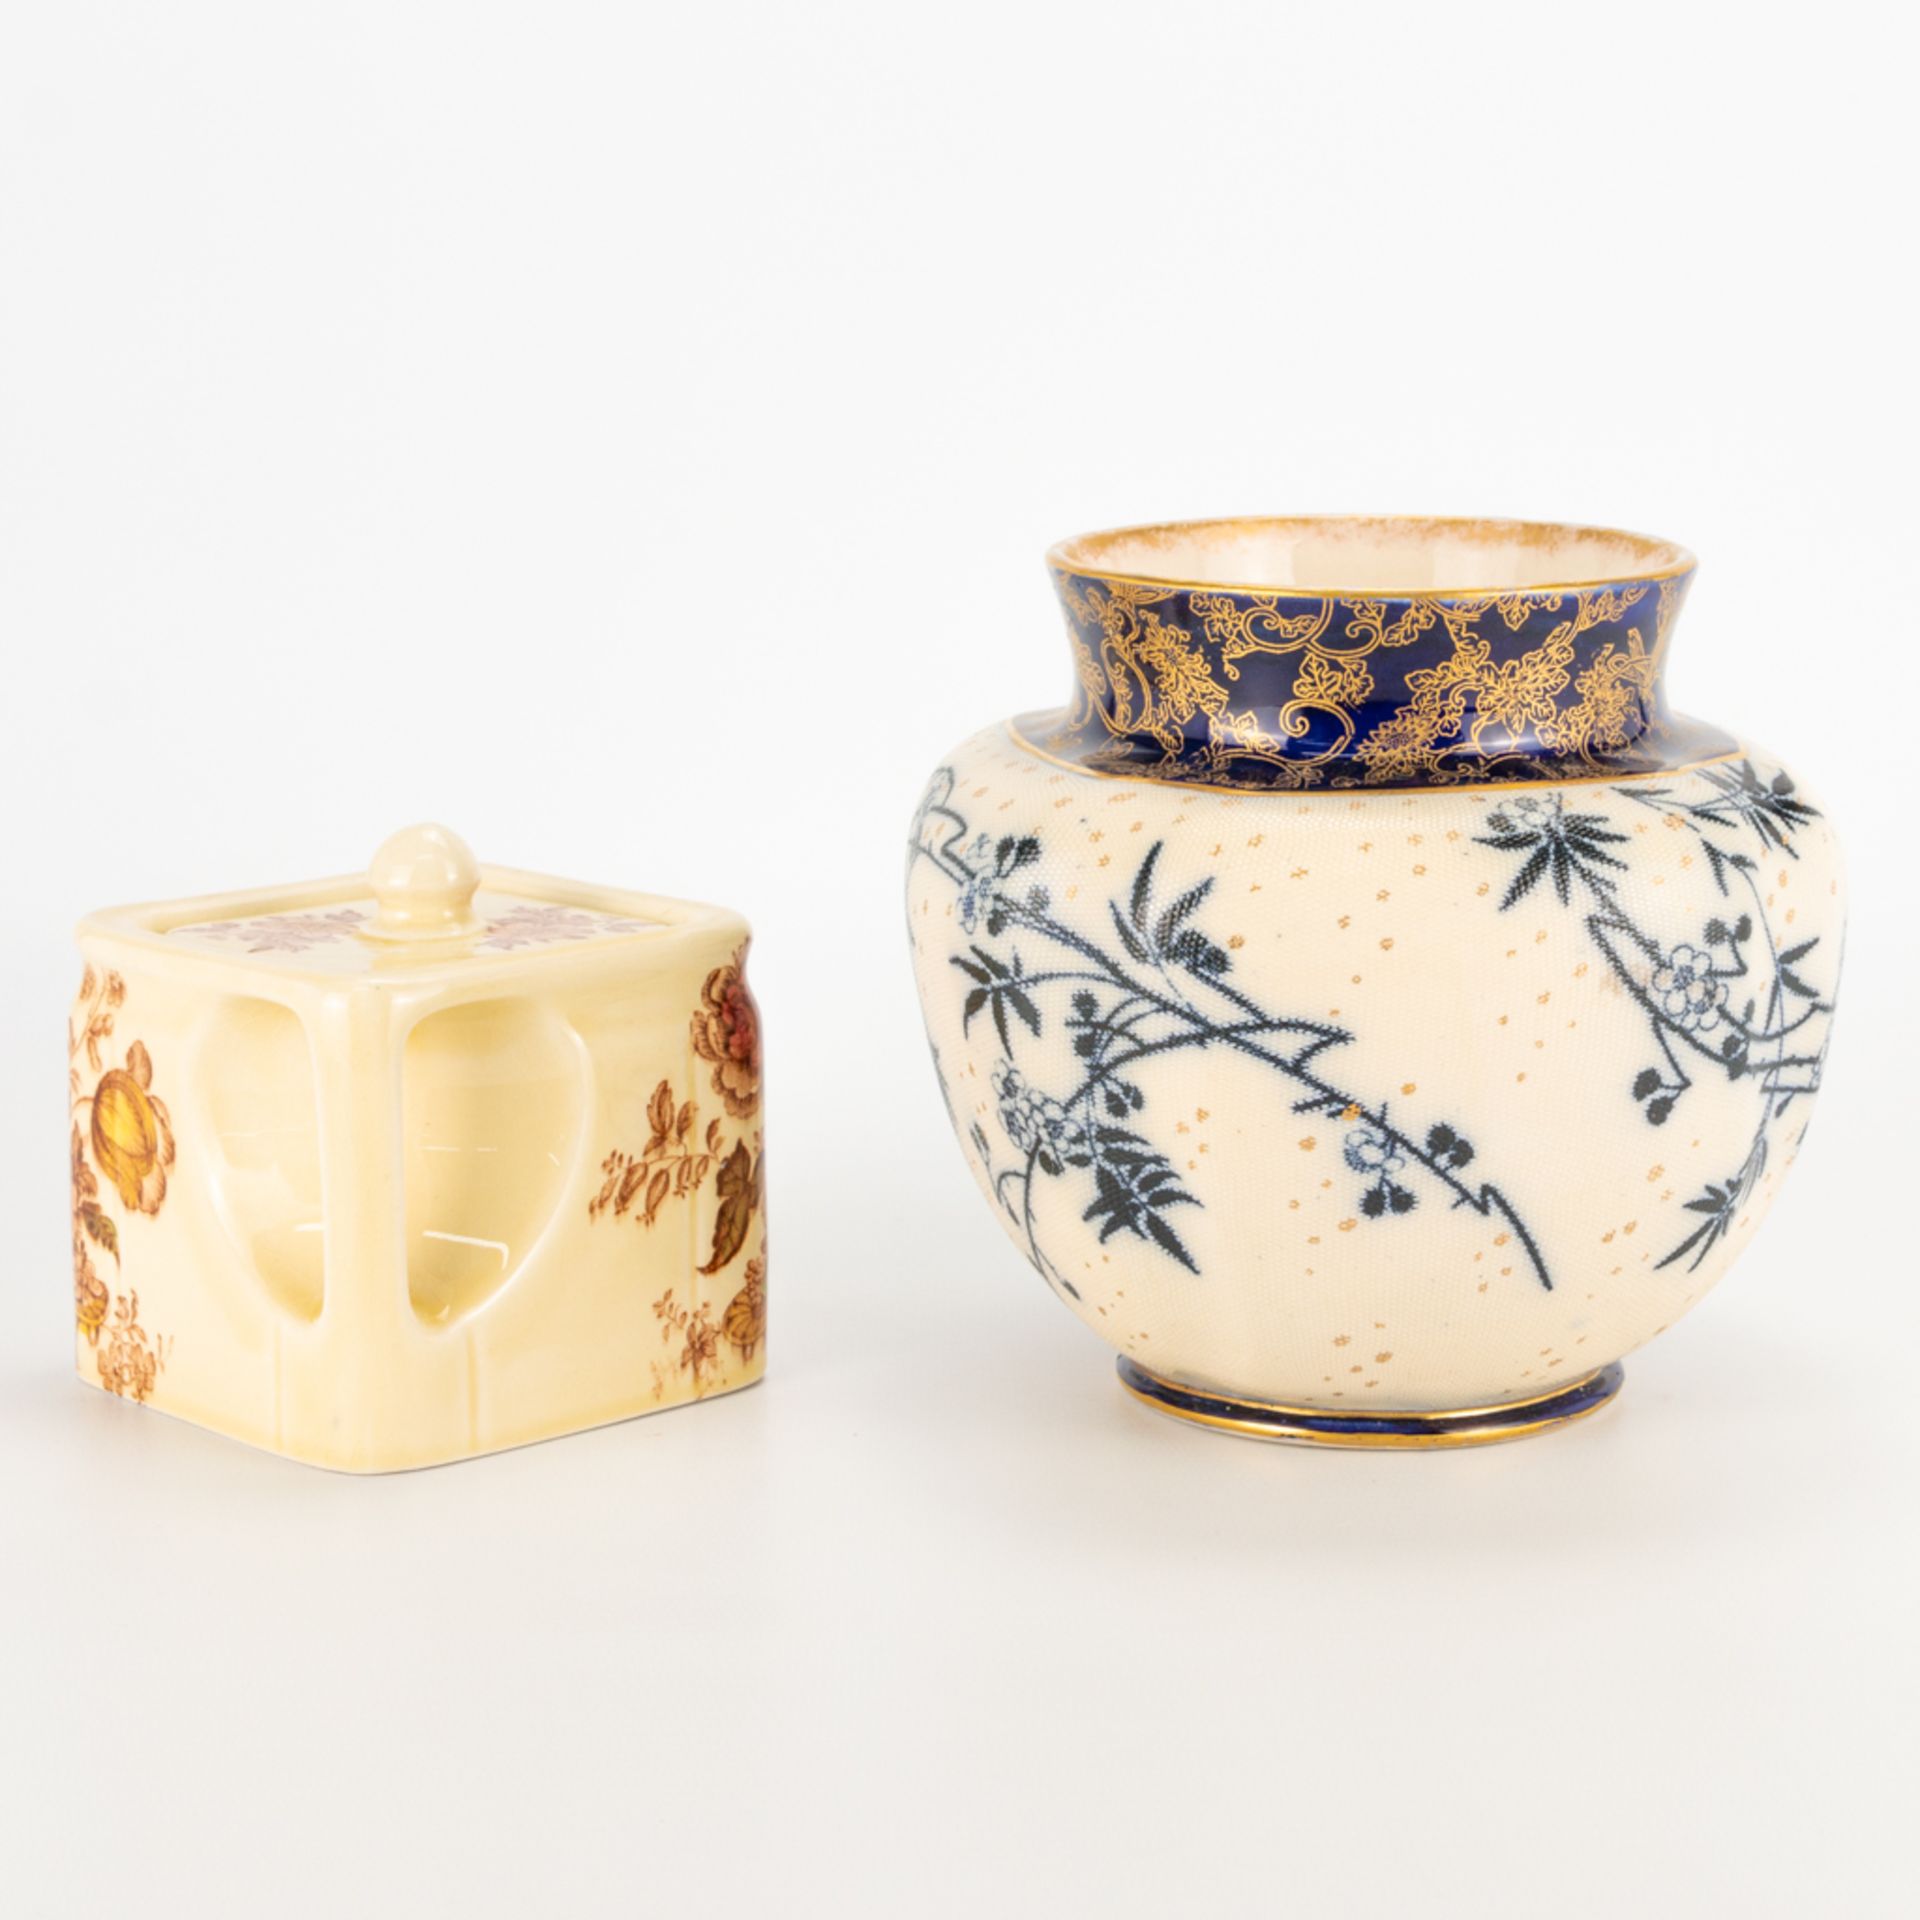 A collection of 2 pieces of English porcelain, a vase made by Doulton and a tea pot made by Clarice - Image 8 of 17